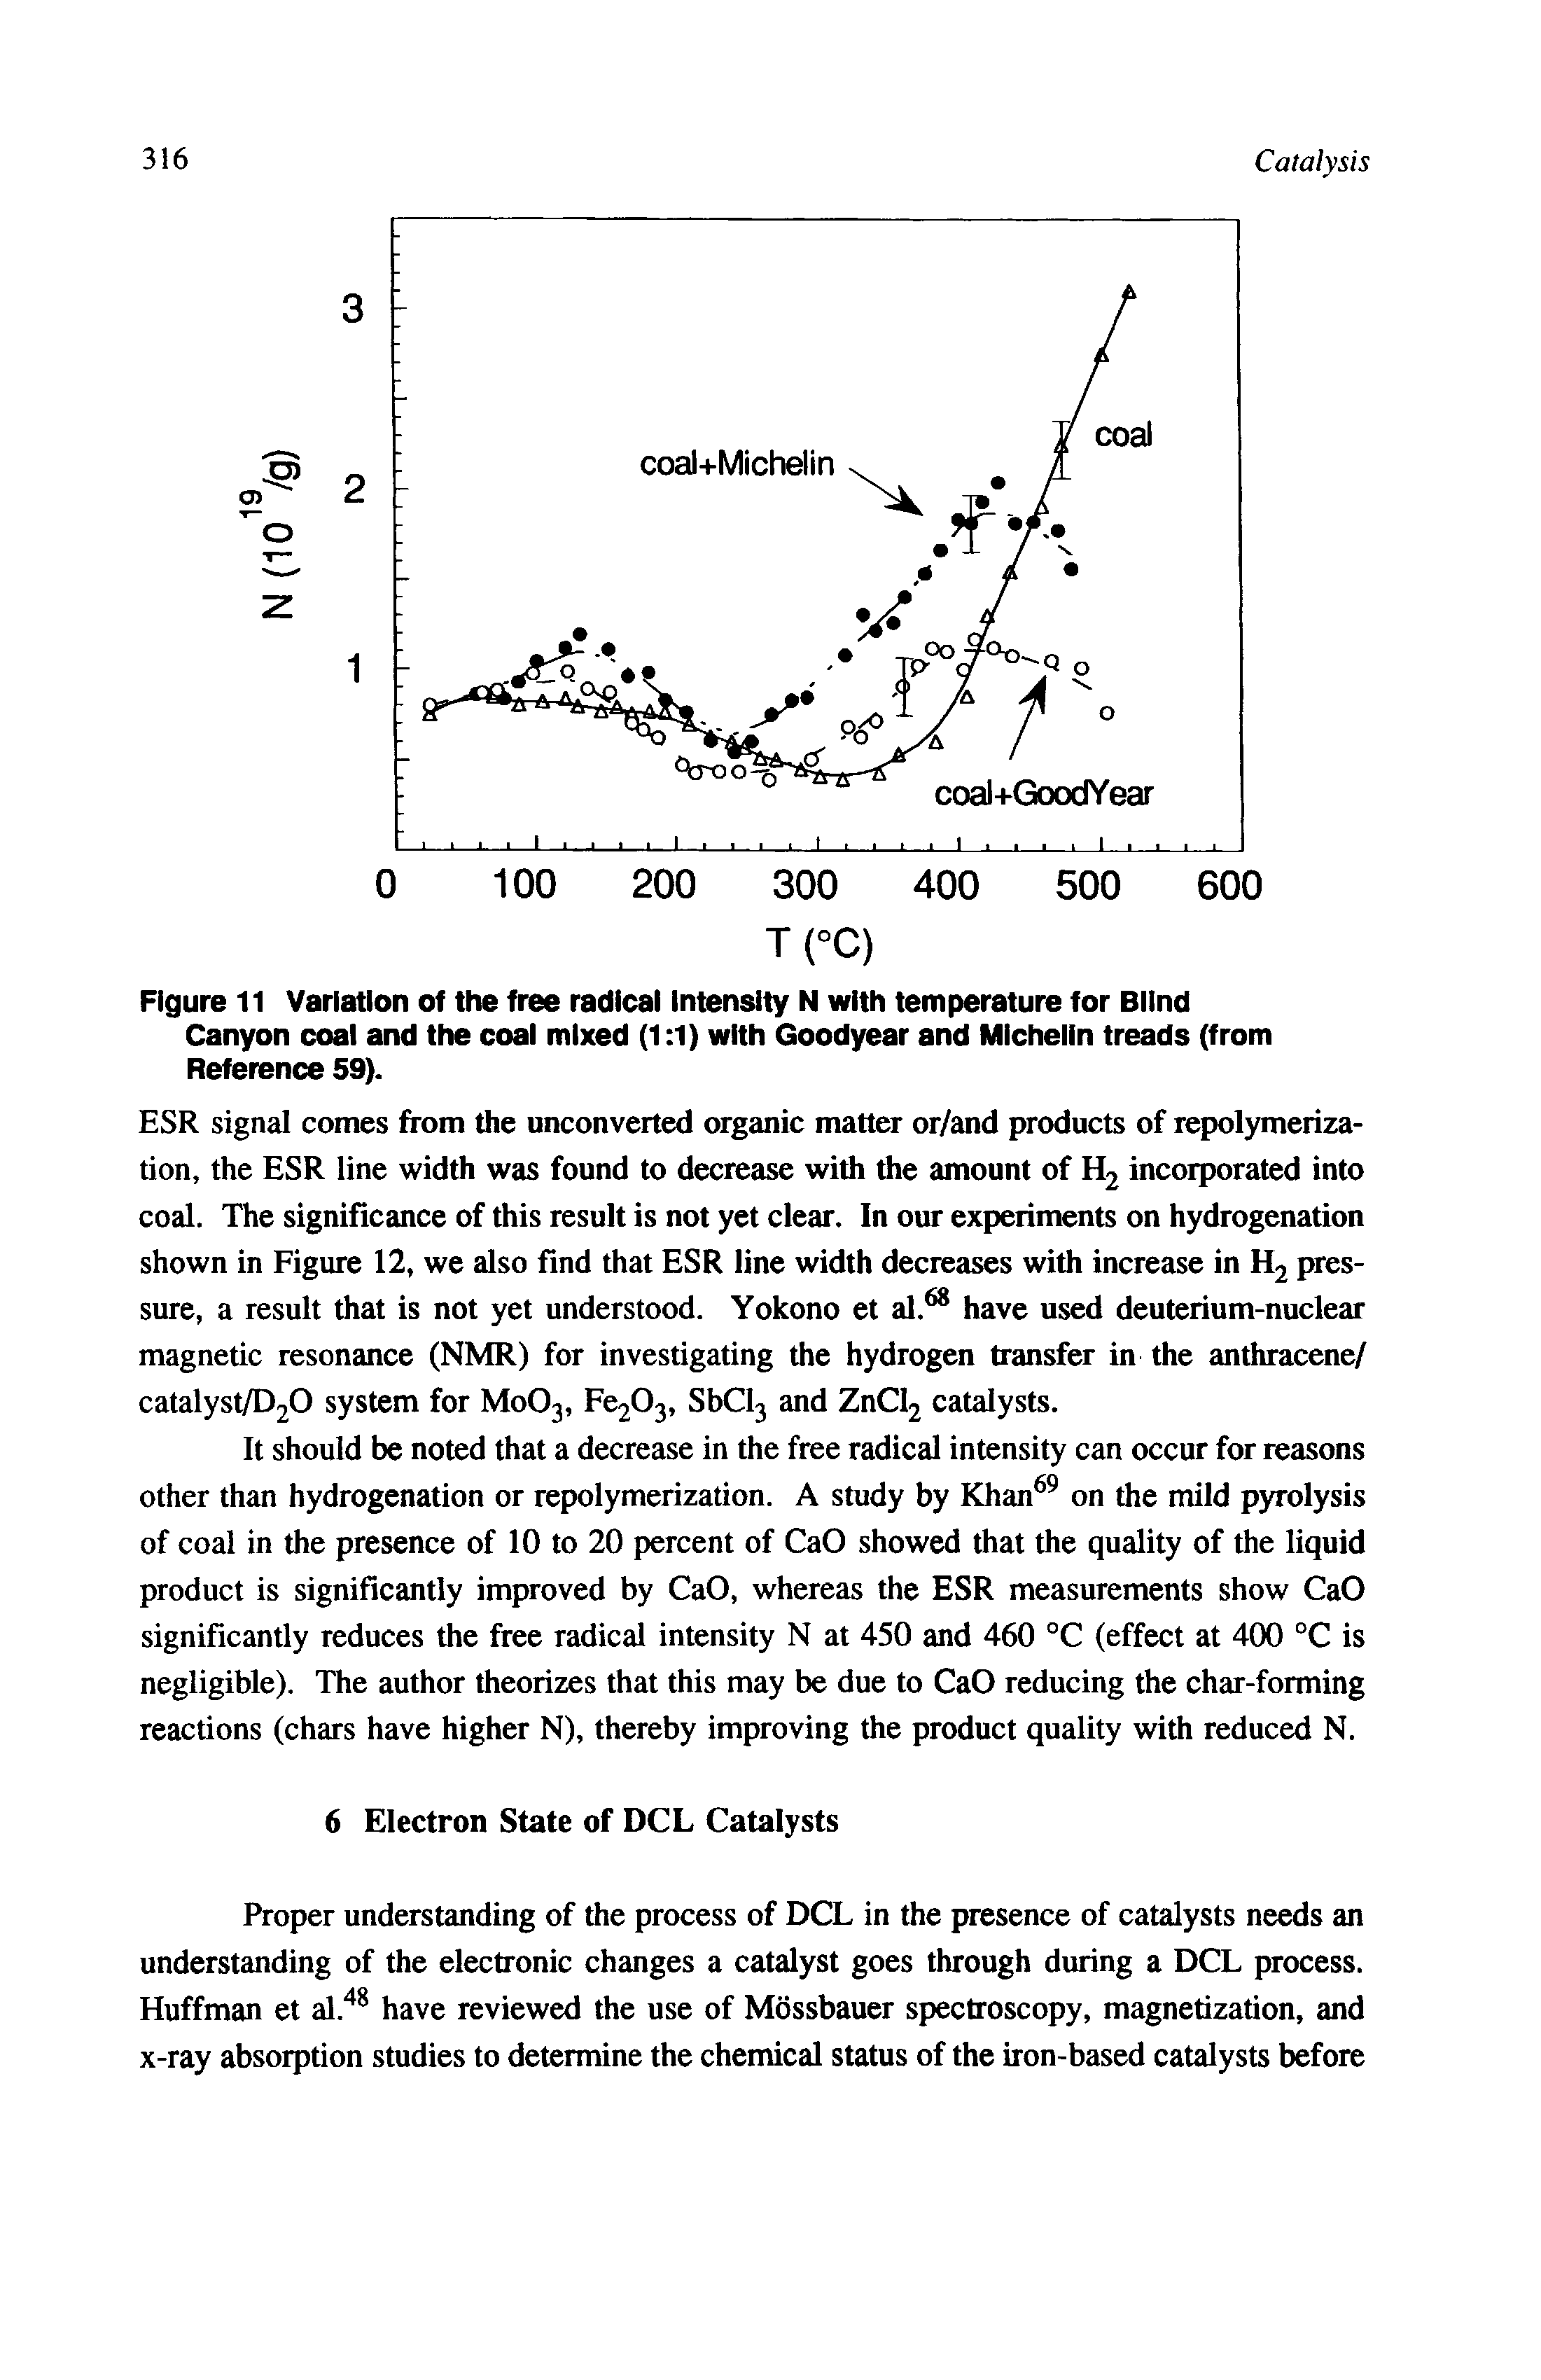 Figure 11 Variation of the free radical Intensity N with temperature for Blind Canyon coal and the coal mixed (1 1) with Goodyear and MIchelln treads (from Reference 59).